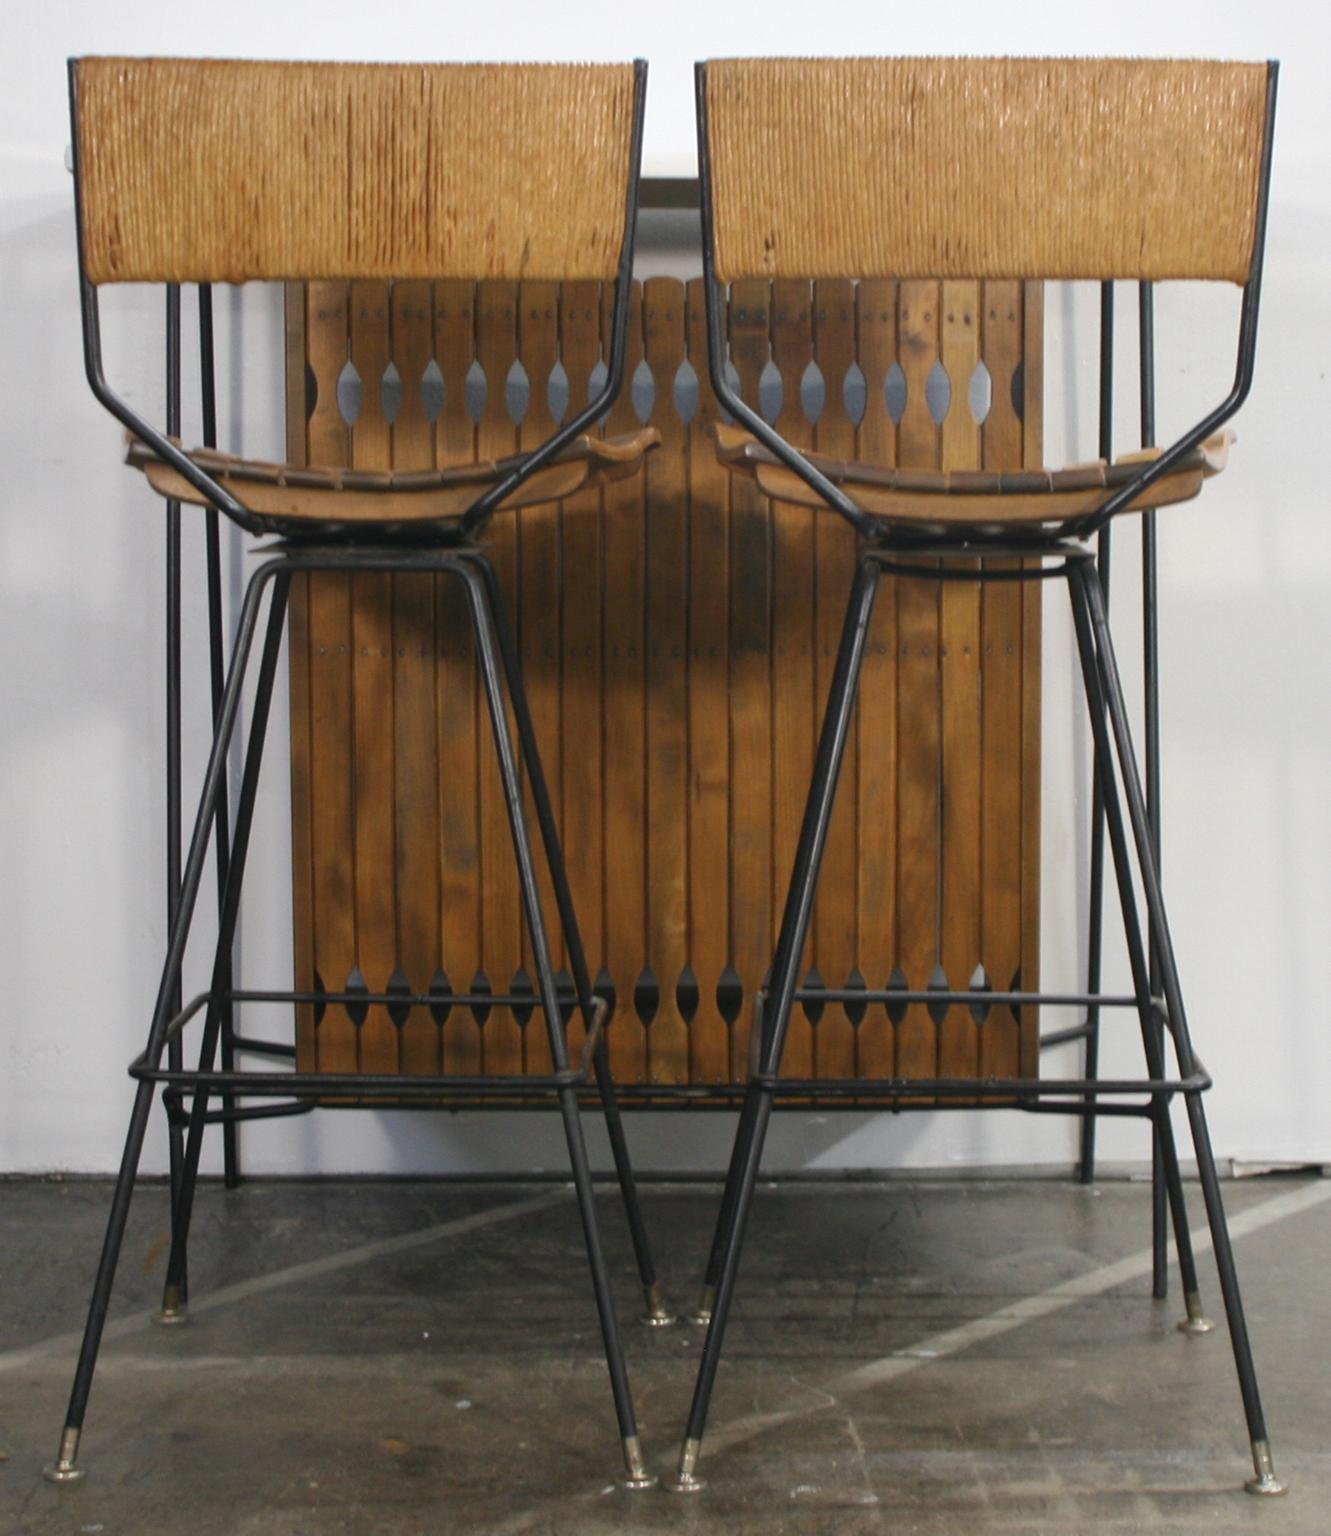 Midcentury Arthur Umanoff dry bar set for Raymor with 2 stools Iron and wood. Amazing condition Totally restored bar and 2 stools. All original bar with white laminate top and 2 open bar shelves. 2 iron stools with papercord backs - both stools